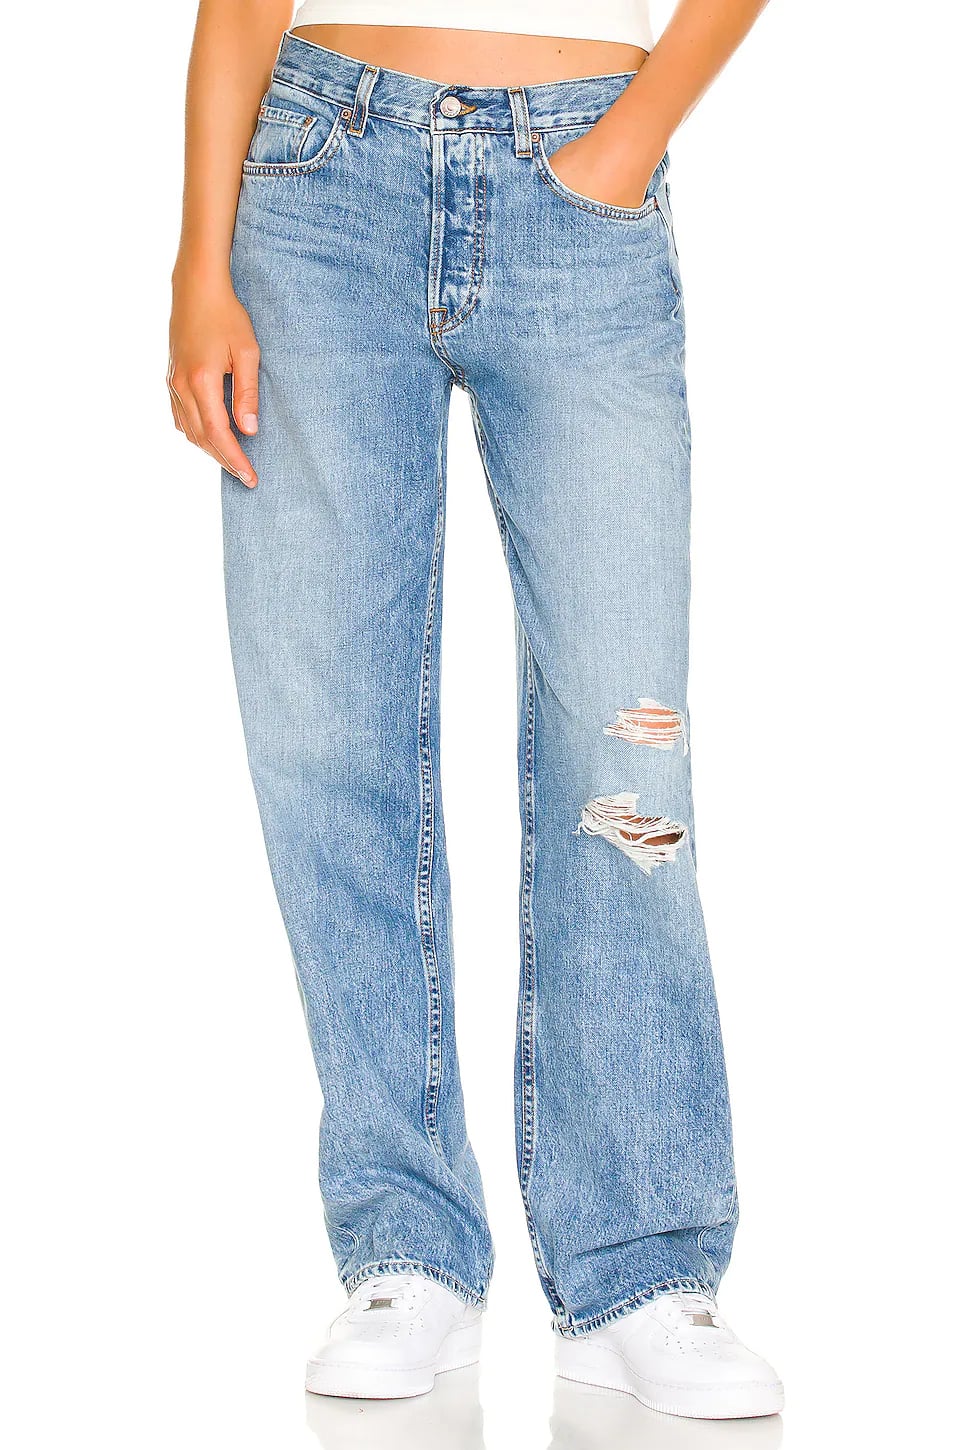 Why are low-rise jeans still a thing? - The Diamondback